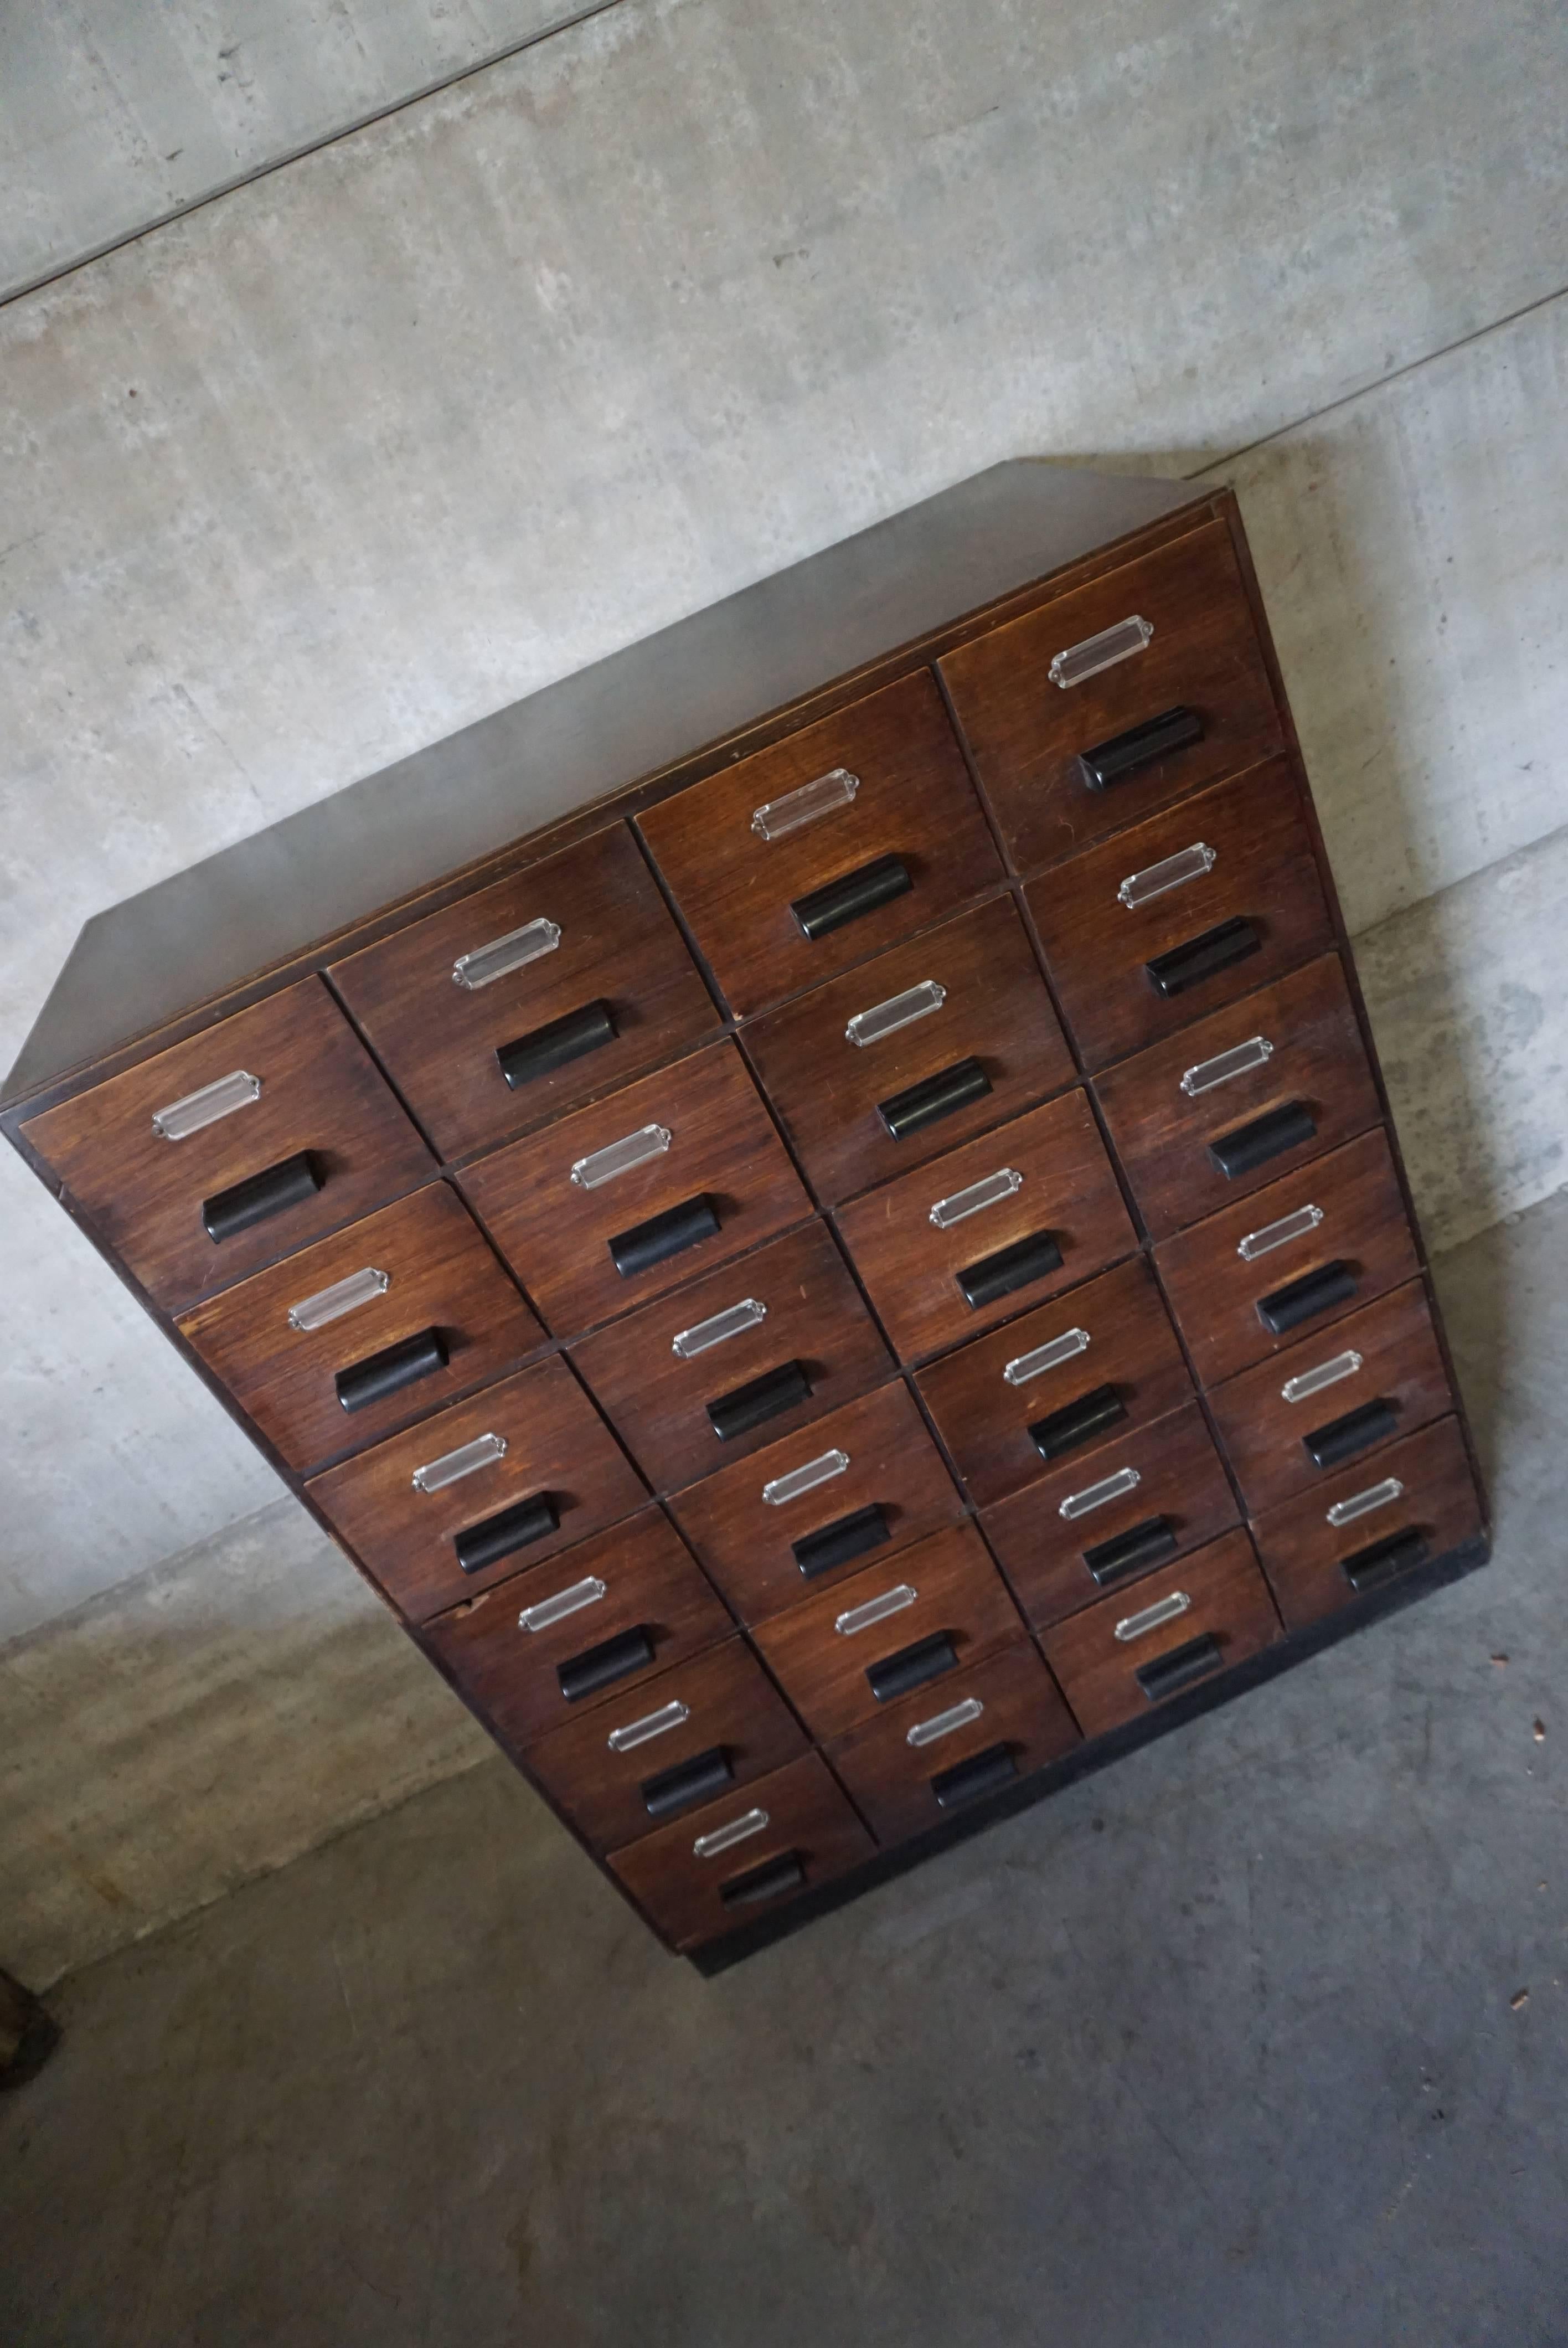 This Industrial wooden filing cabinet is made from oak veneer with bakelite handles and was designed and made in the 1950s. It is in a good vintage condition with signs of use consistent with age.